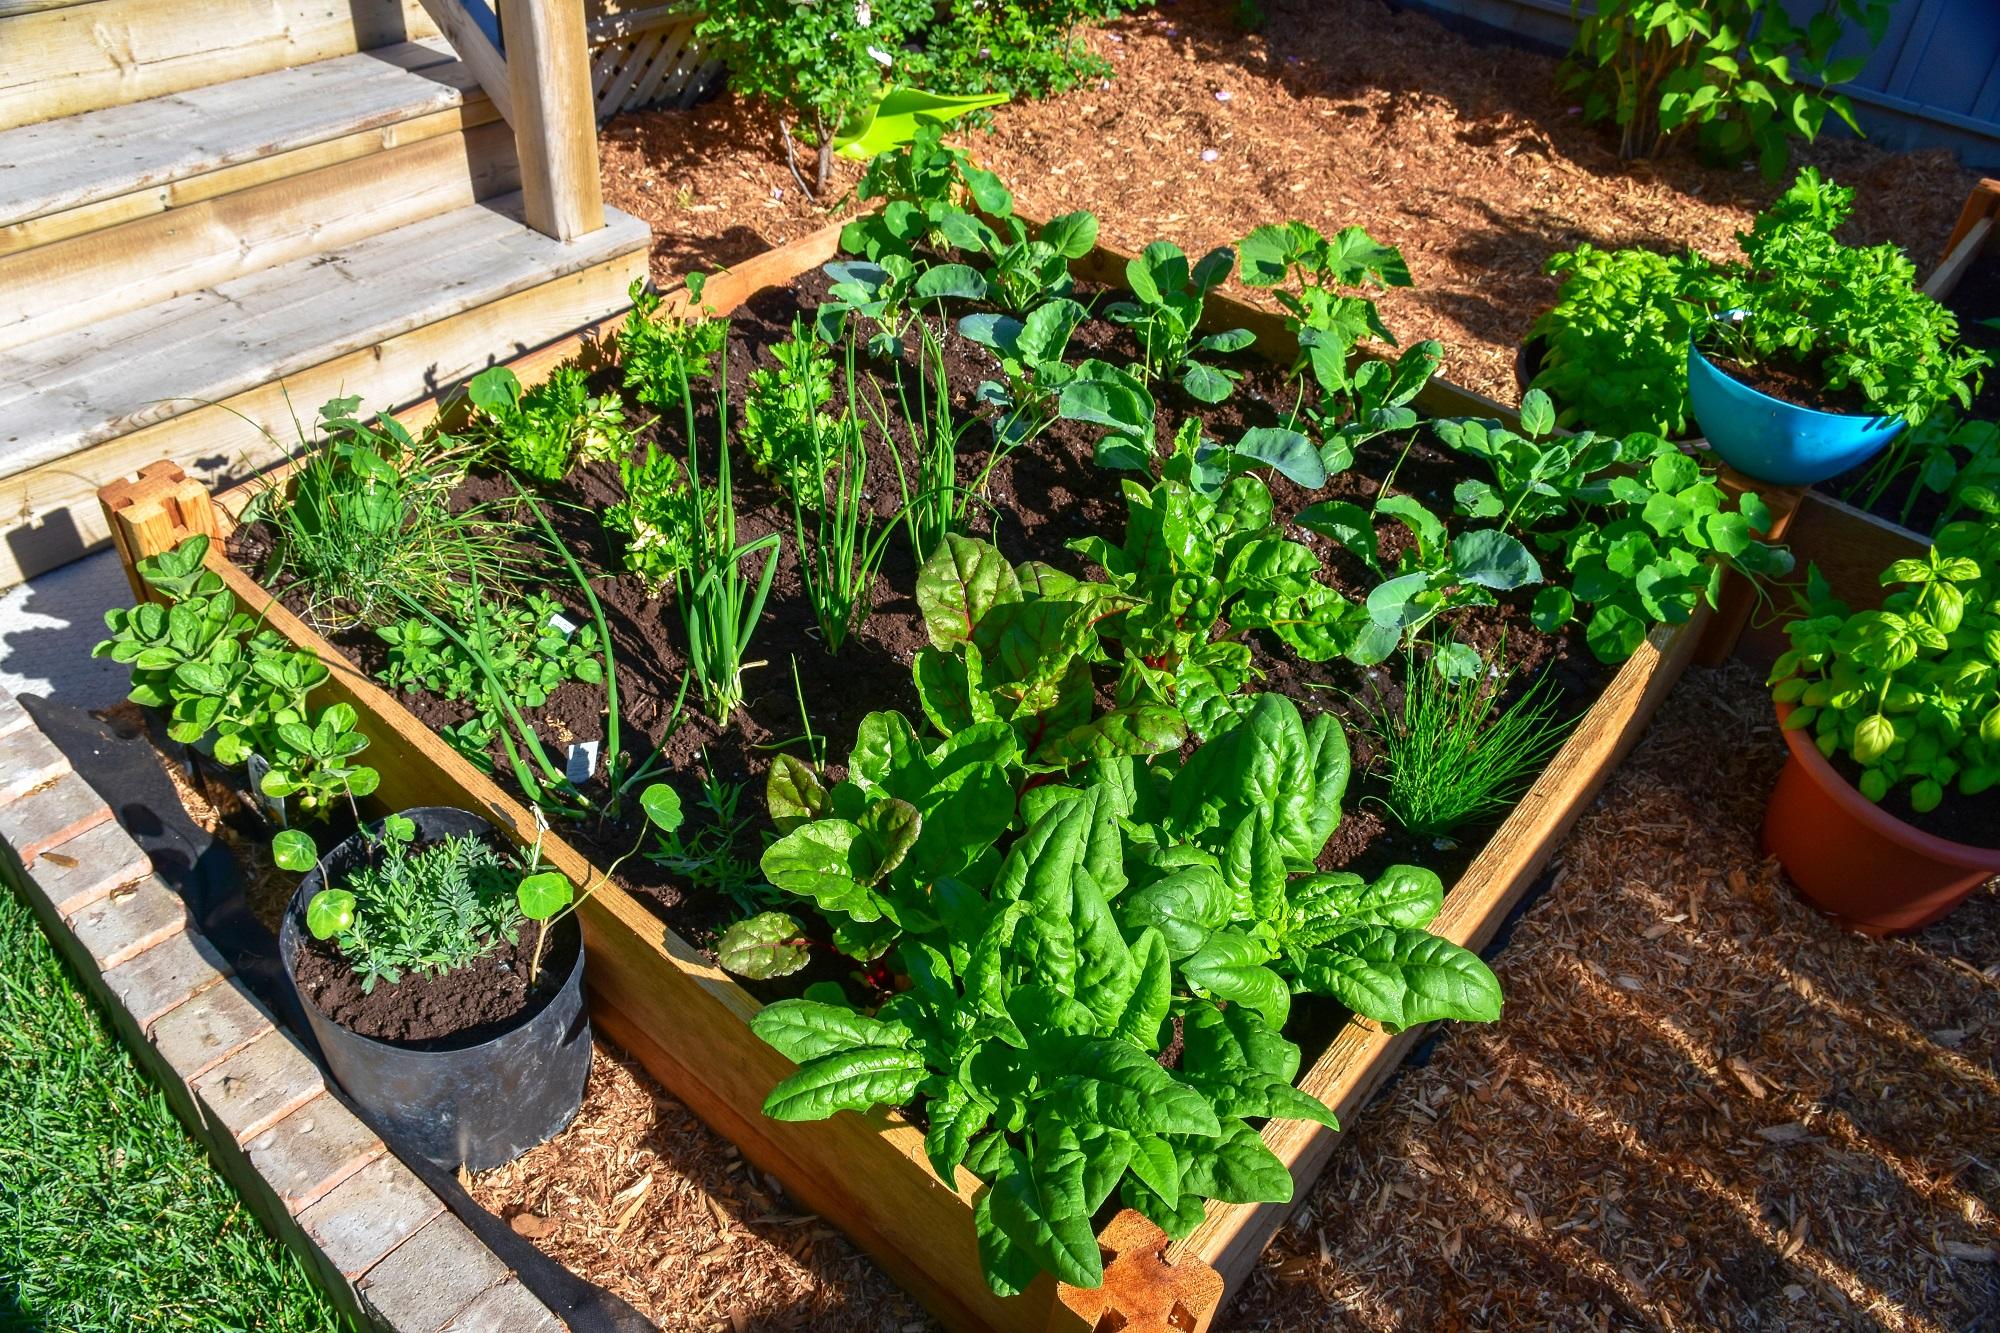 A raised garden bed by stairs to a patio with many vegetables and herbs growing in it.